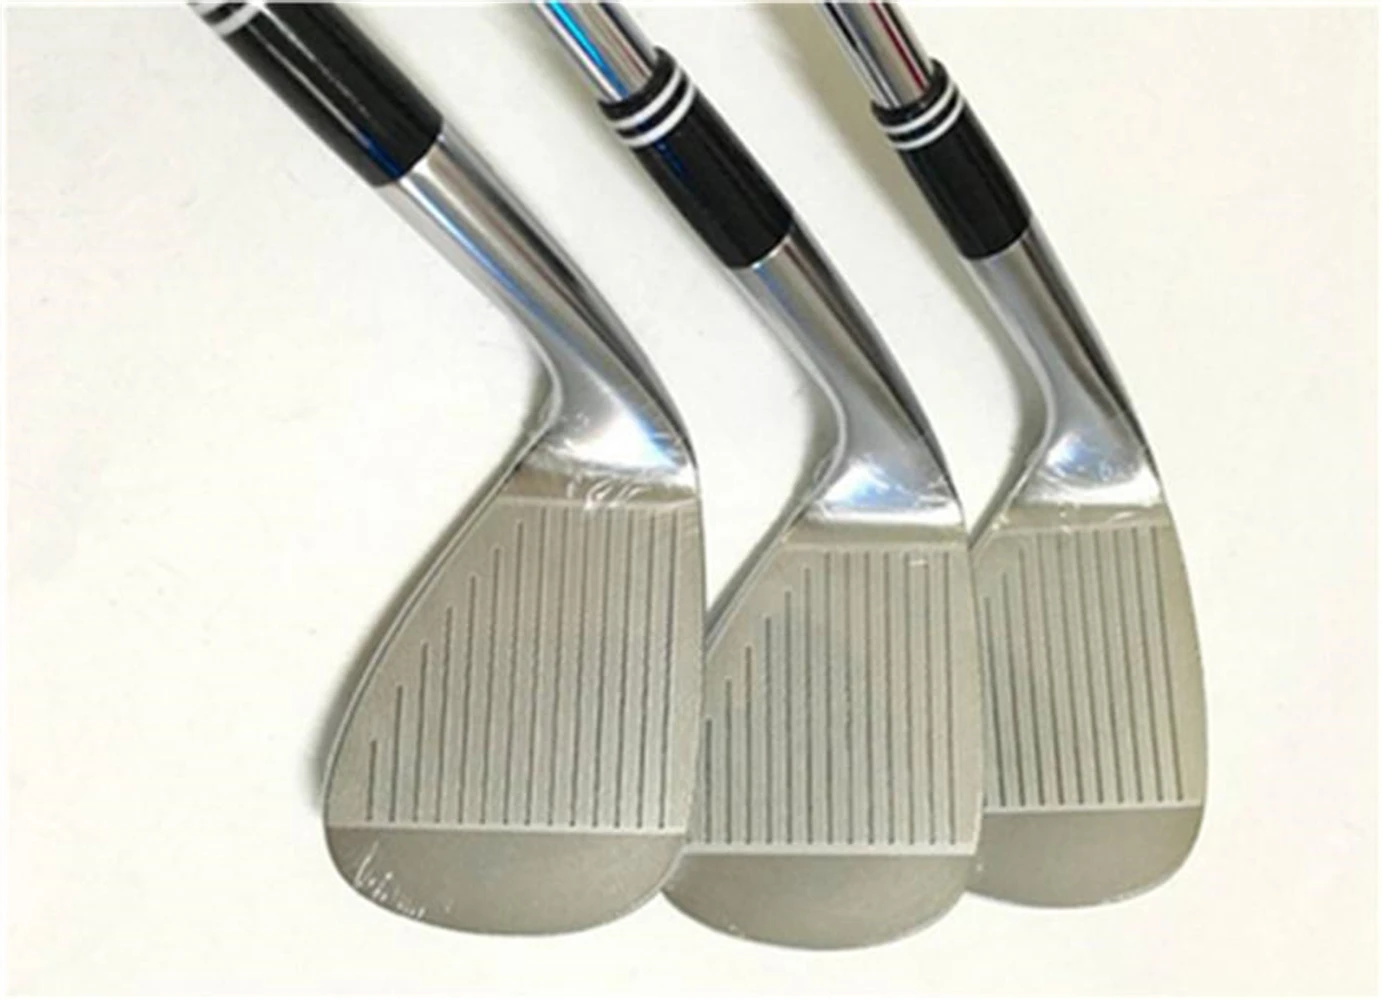 

3PC R-T-X-4 Silver Golf Wedges Clubs Golf 48/50/52/54/56/58/60/62 R/S Steel Shafts Headcovers Fast Free Shipping